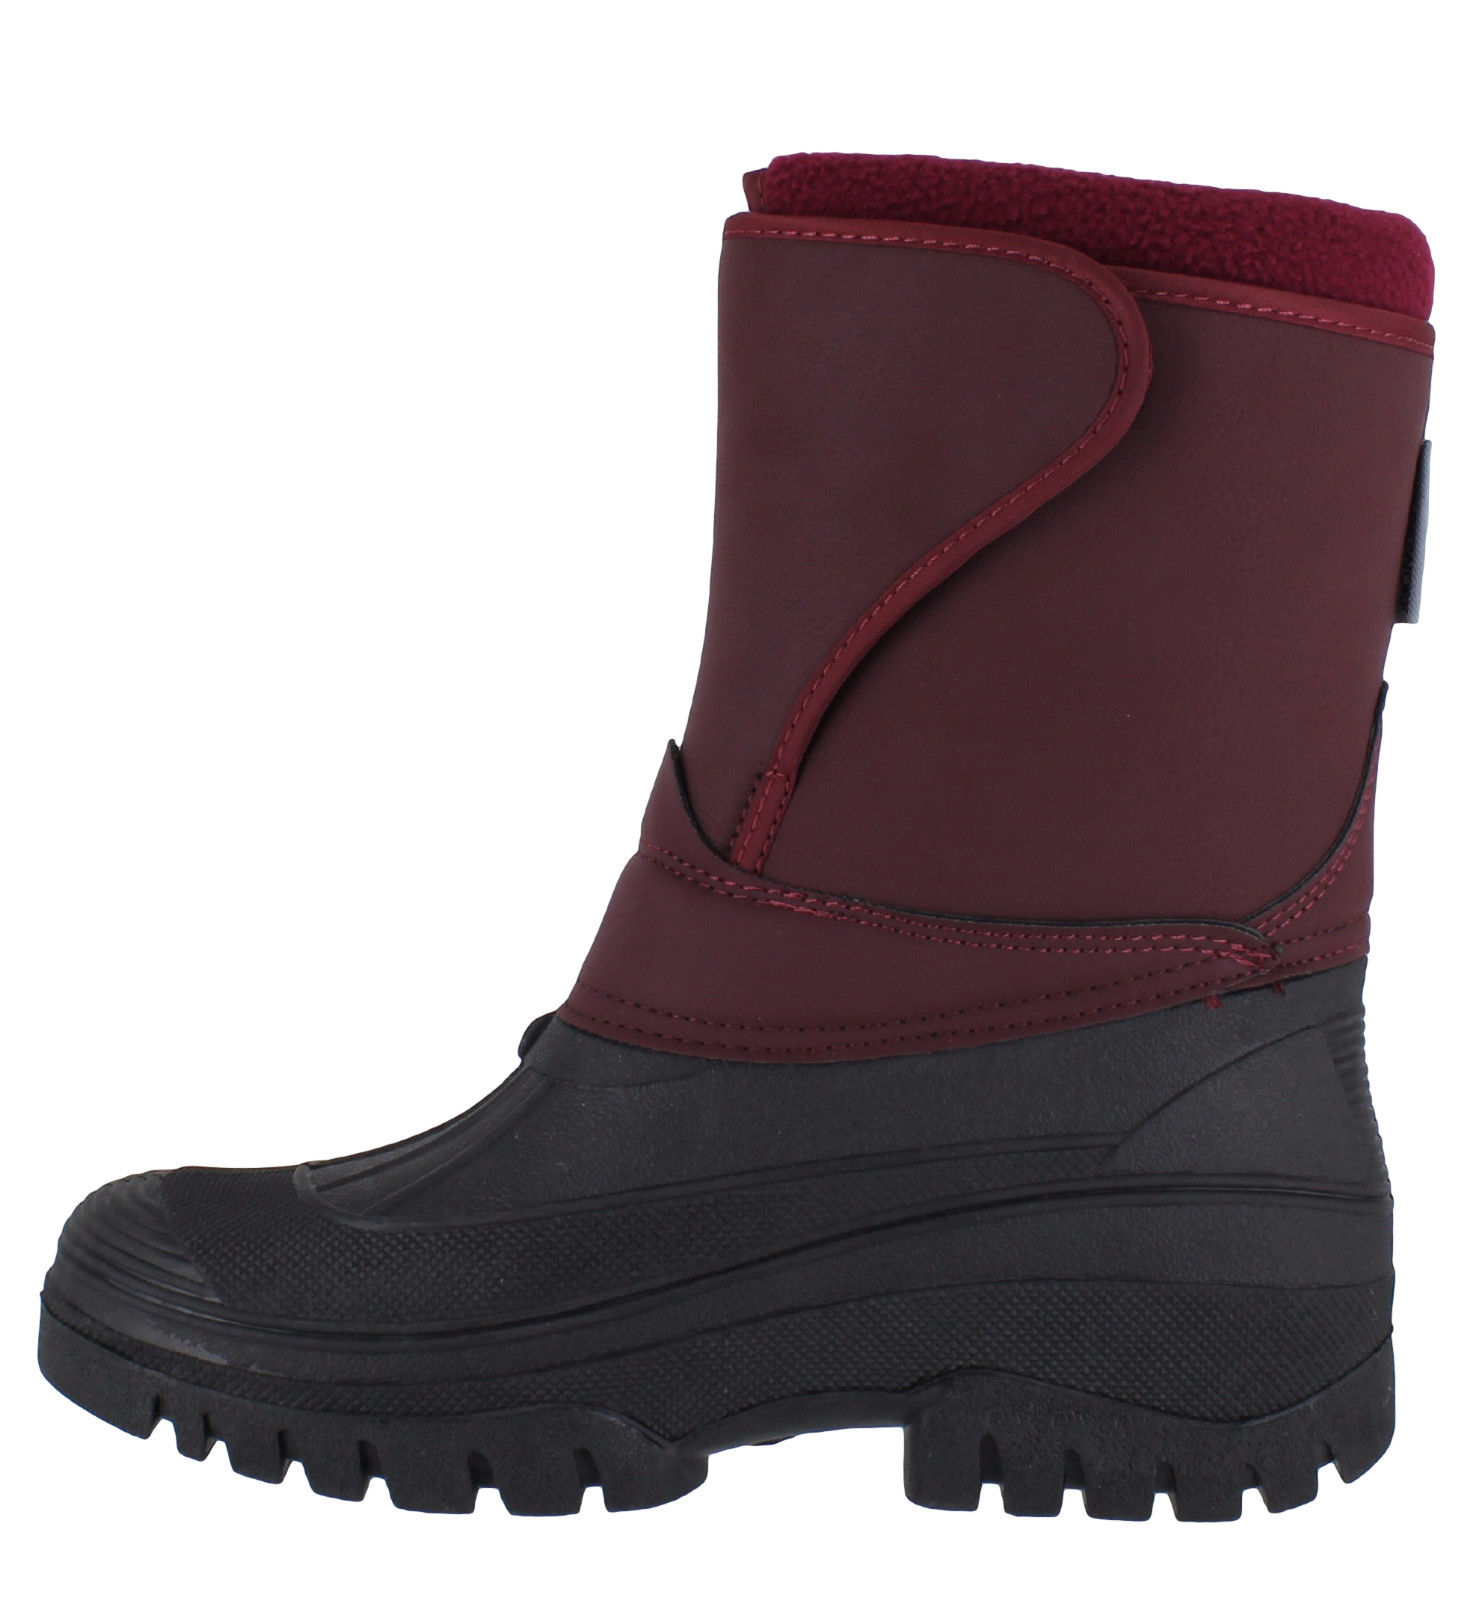 Womens Nubuck Style Easy Velcro Winter Stable Yard Snow Boots Sizes 4 to 8